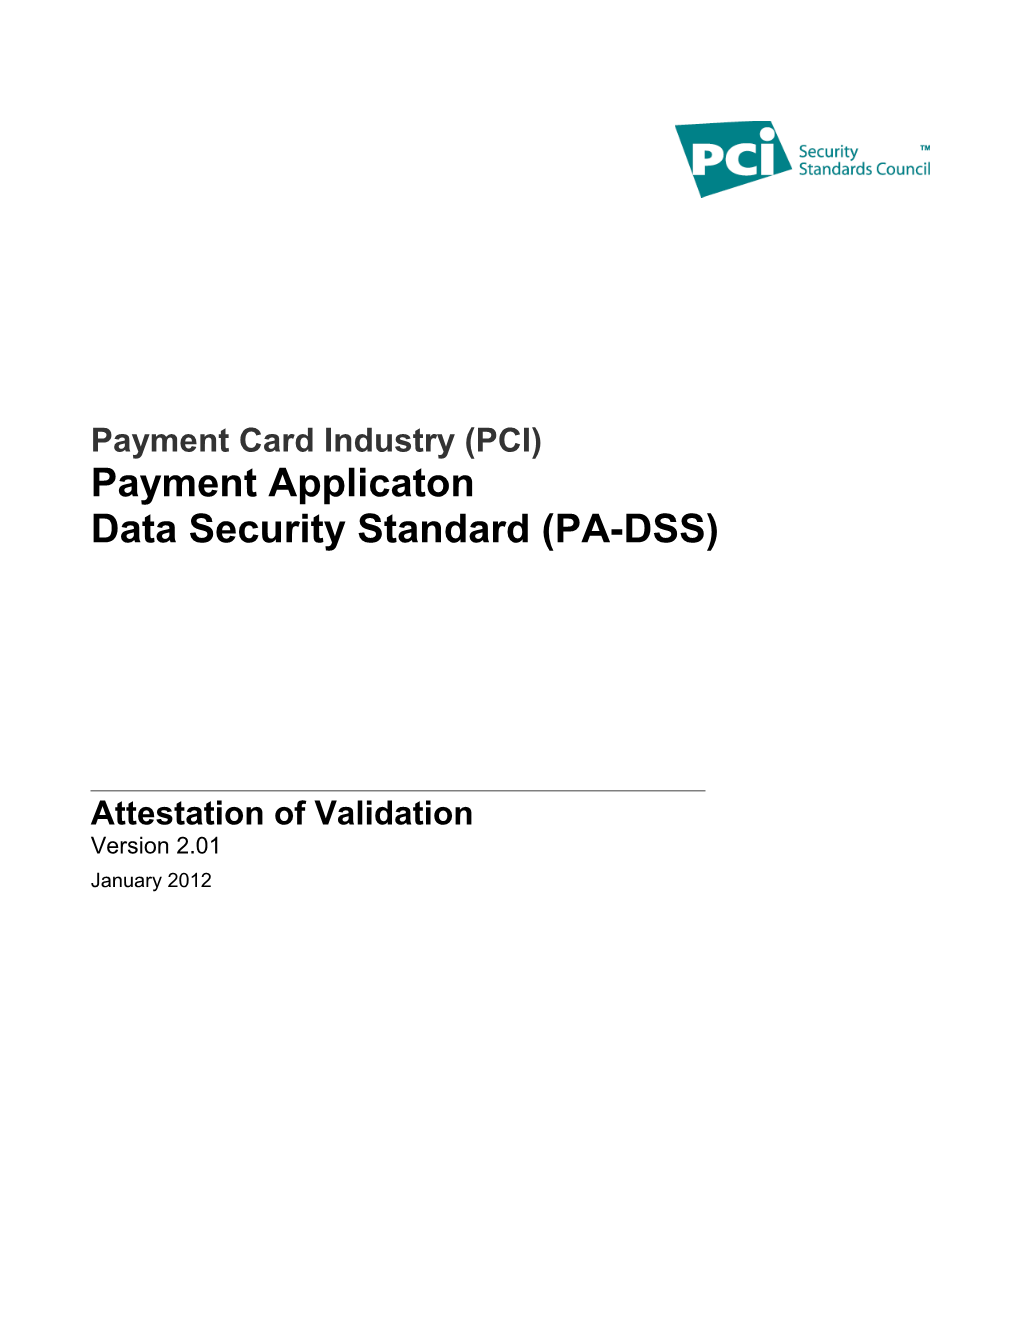 Payment Card Industry (PCI) Payment Applicaton Data Security Standard (PA-DSS)